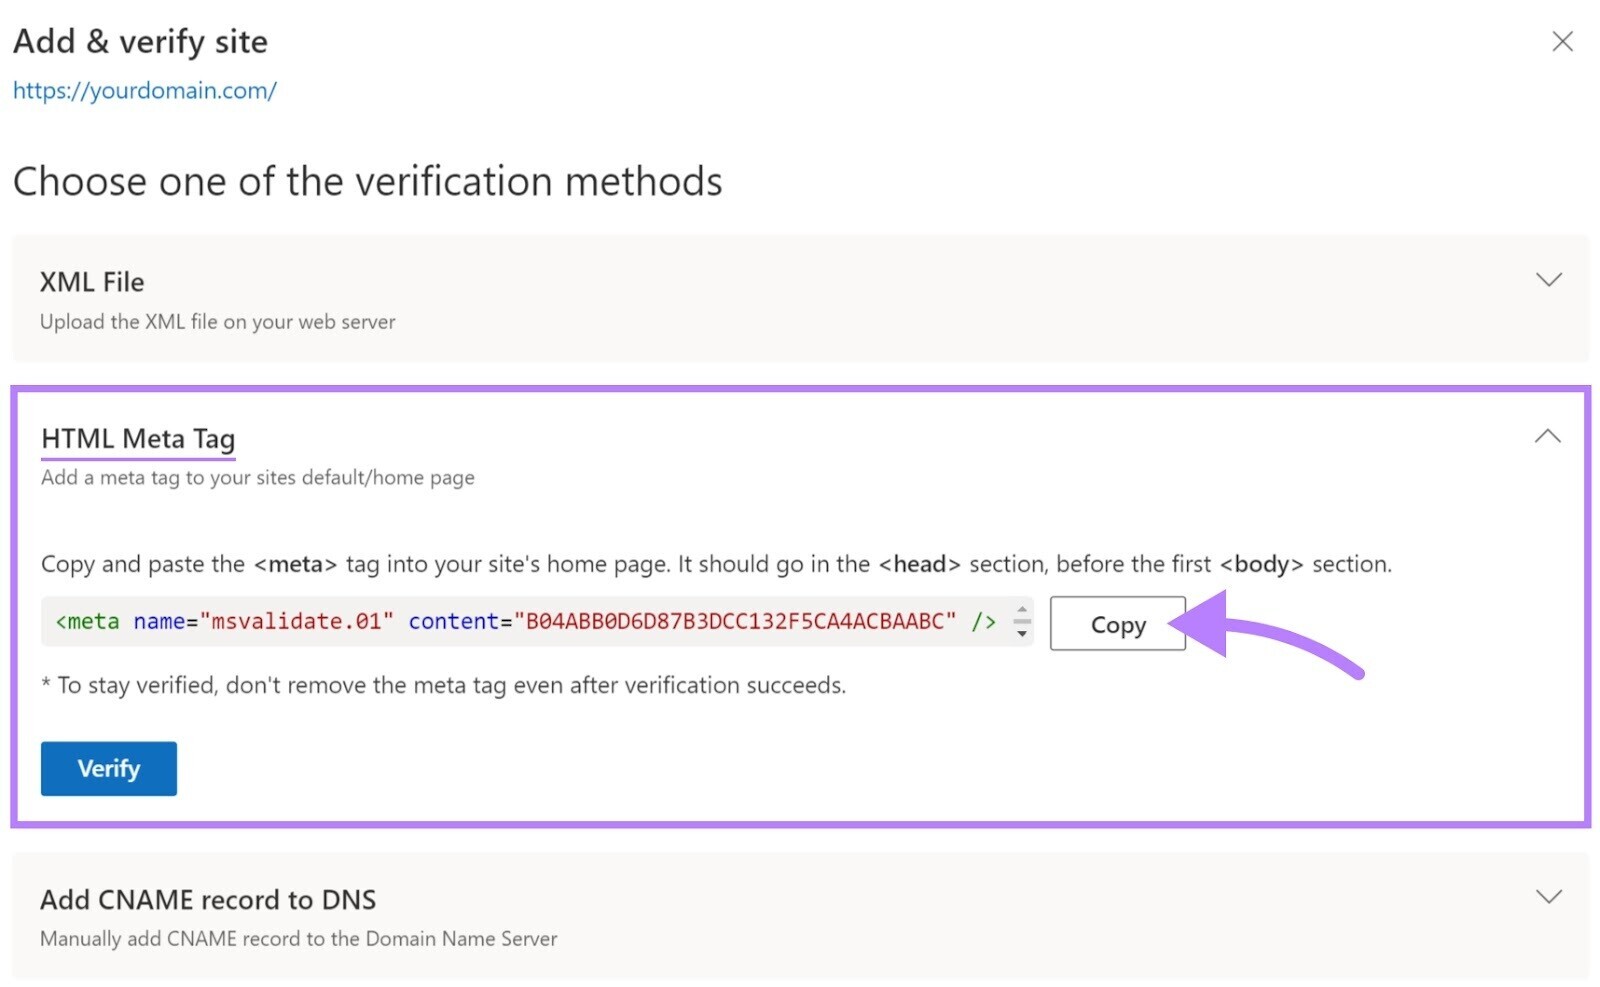 "Add & verify site" screen in Bing Webmaster Tools